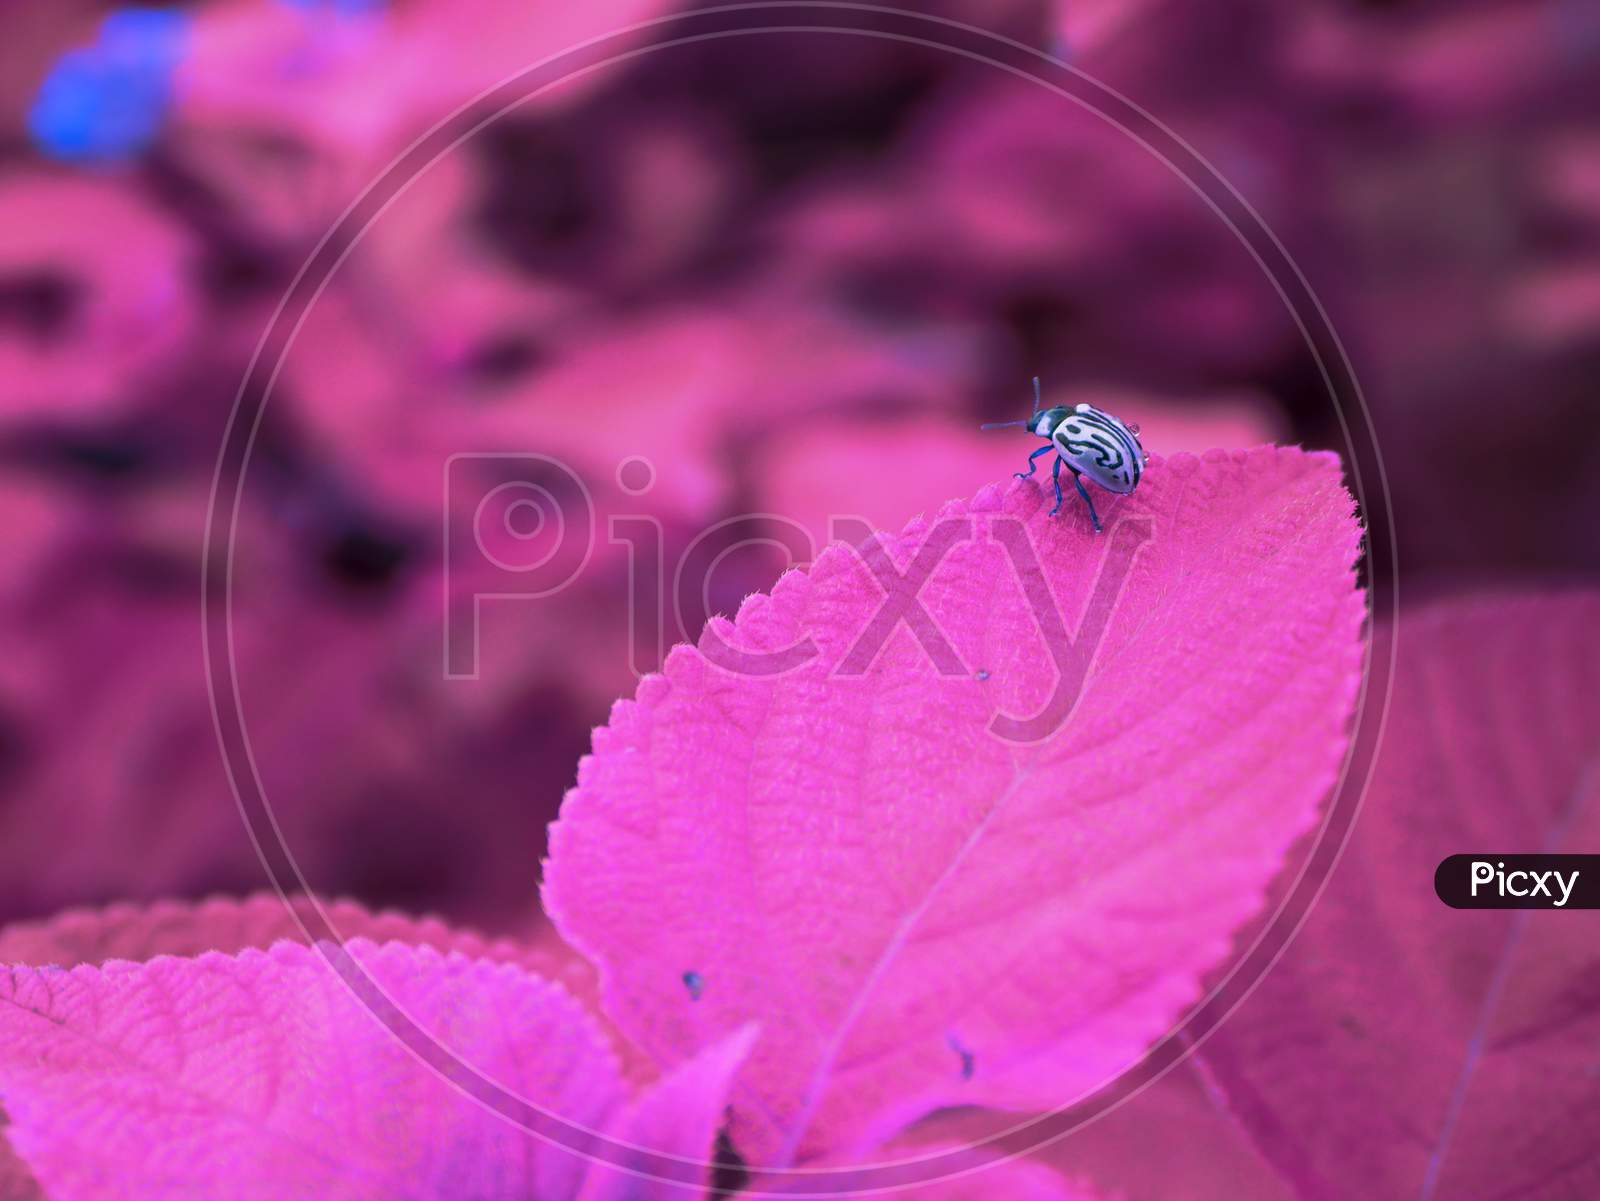 Asian Beetle Sitting Upon Pink Leaf, Nature Background With Text Space, Indian Insect Lifestyle.